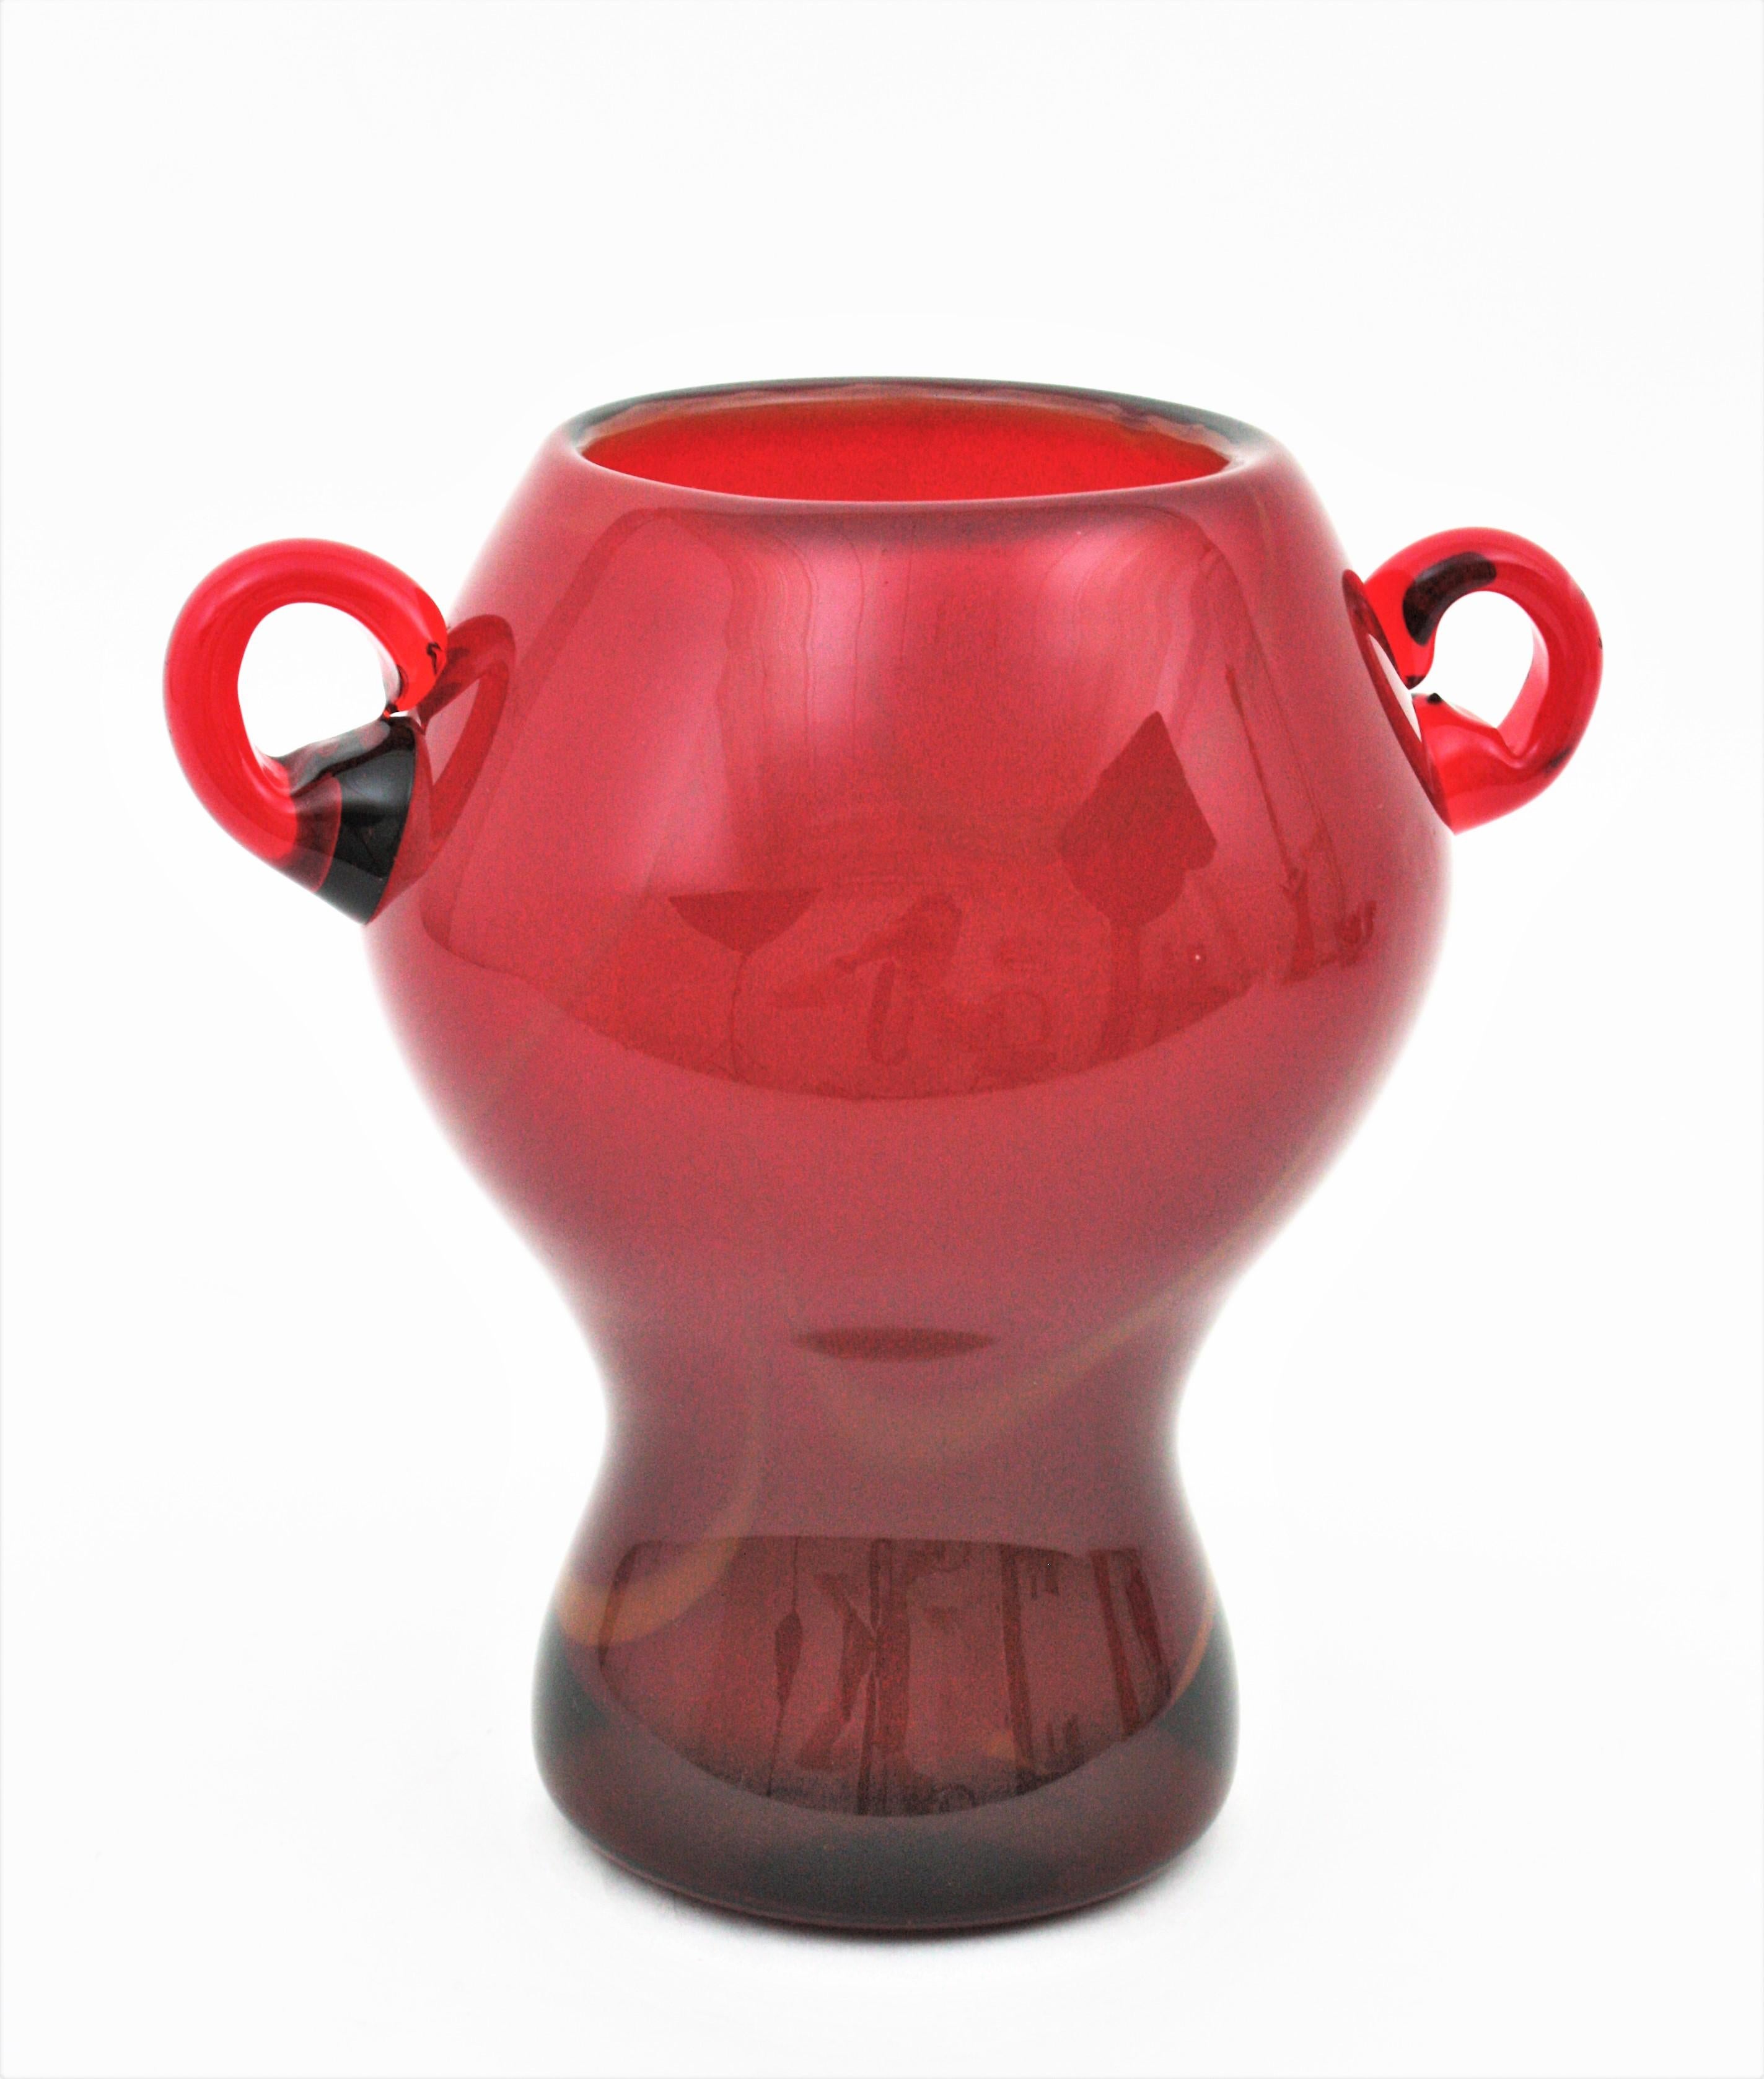 Sommerso Archimede Seguso Red Toffee Art Glass Vase with Handles, Italy, 1950s For Sale